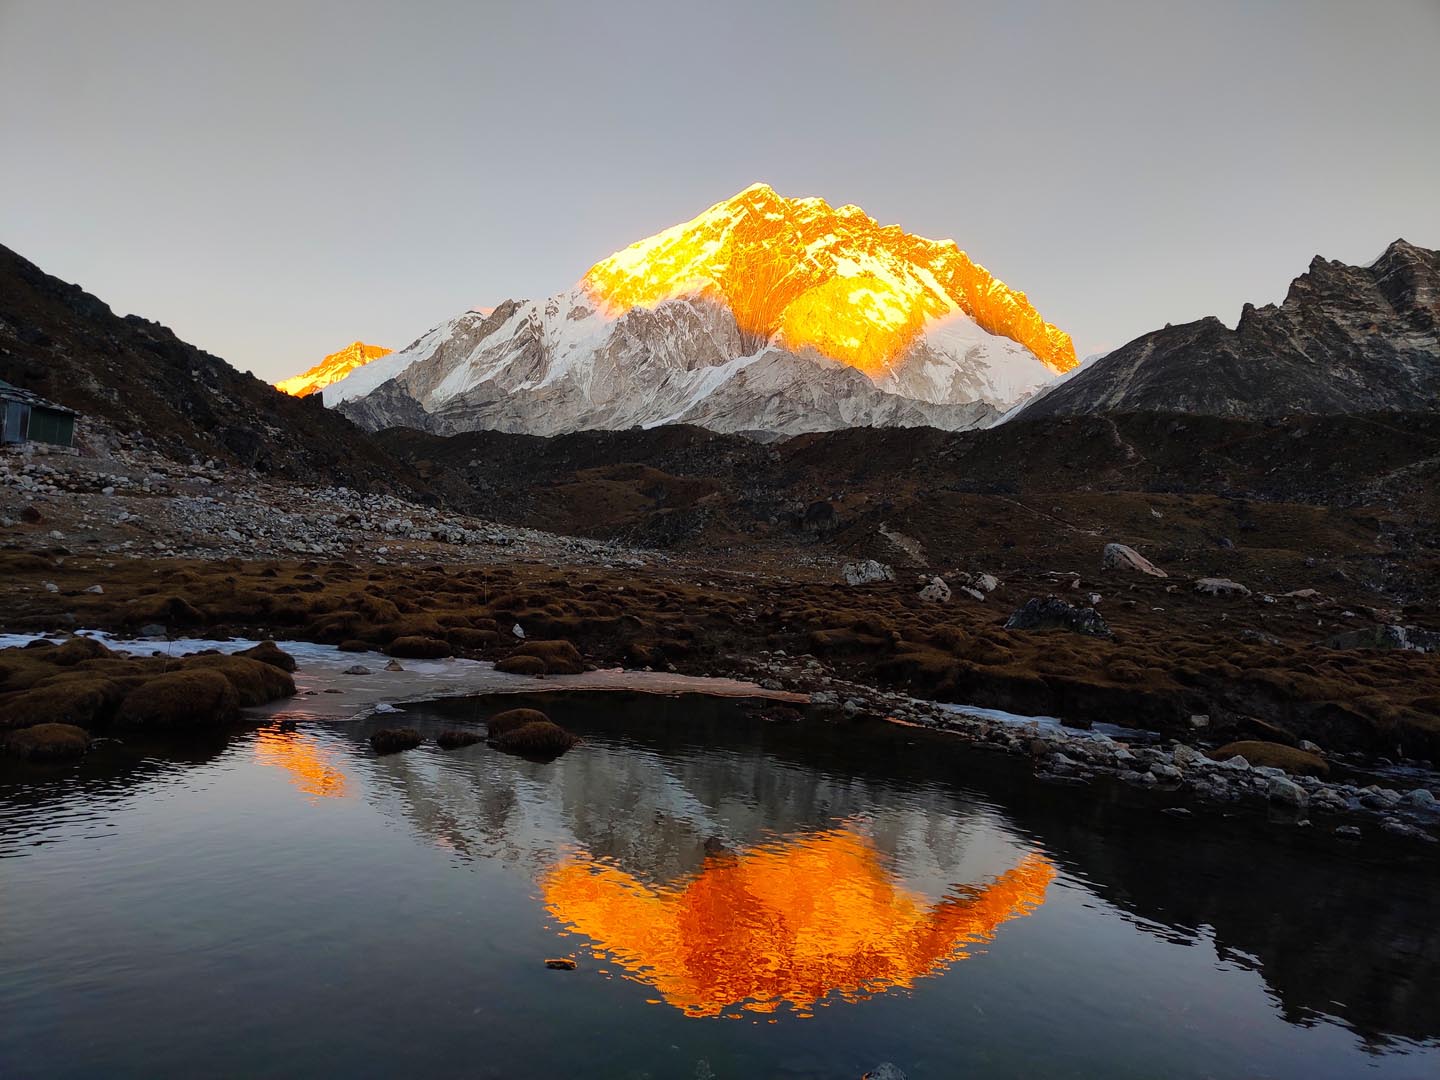 Sunset view of Mount Nuptse from Lobuche